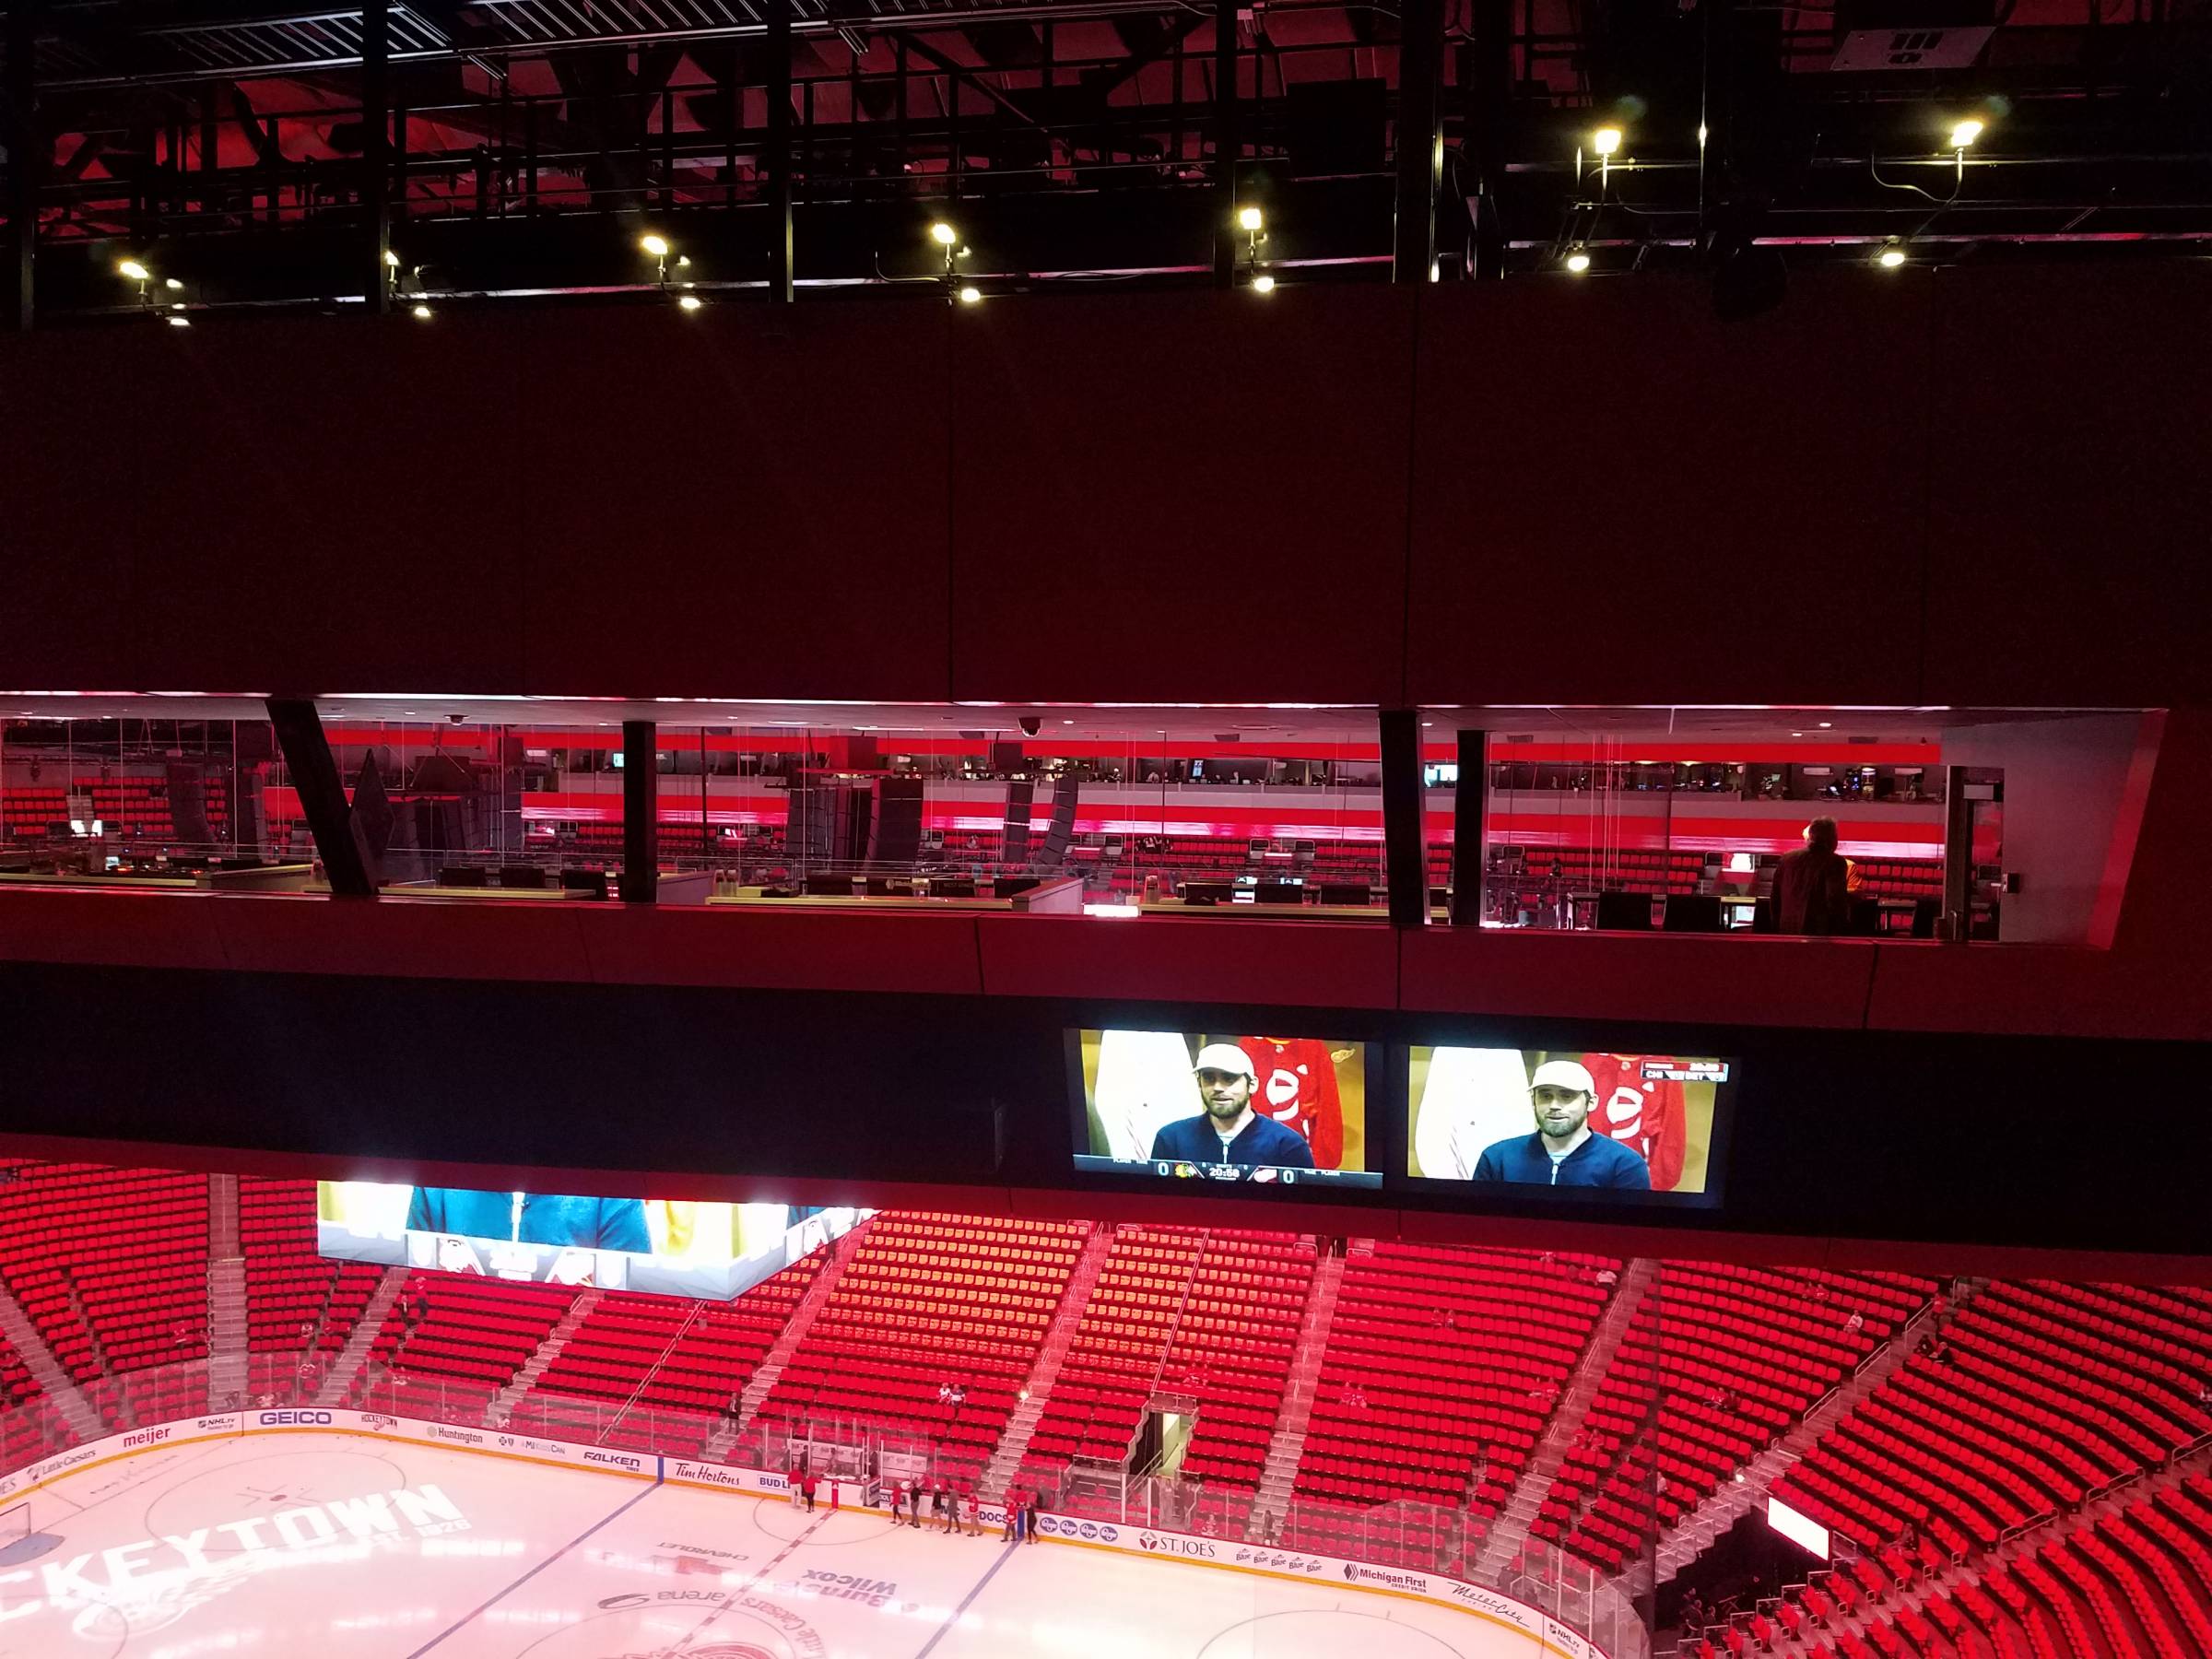 Everything inside Little Caesars Arena, from locker rooms to